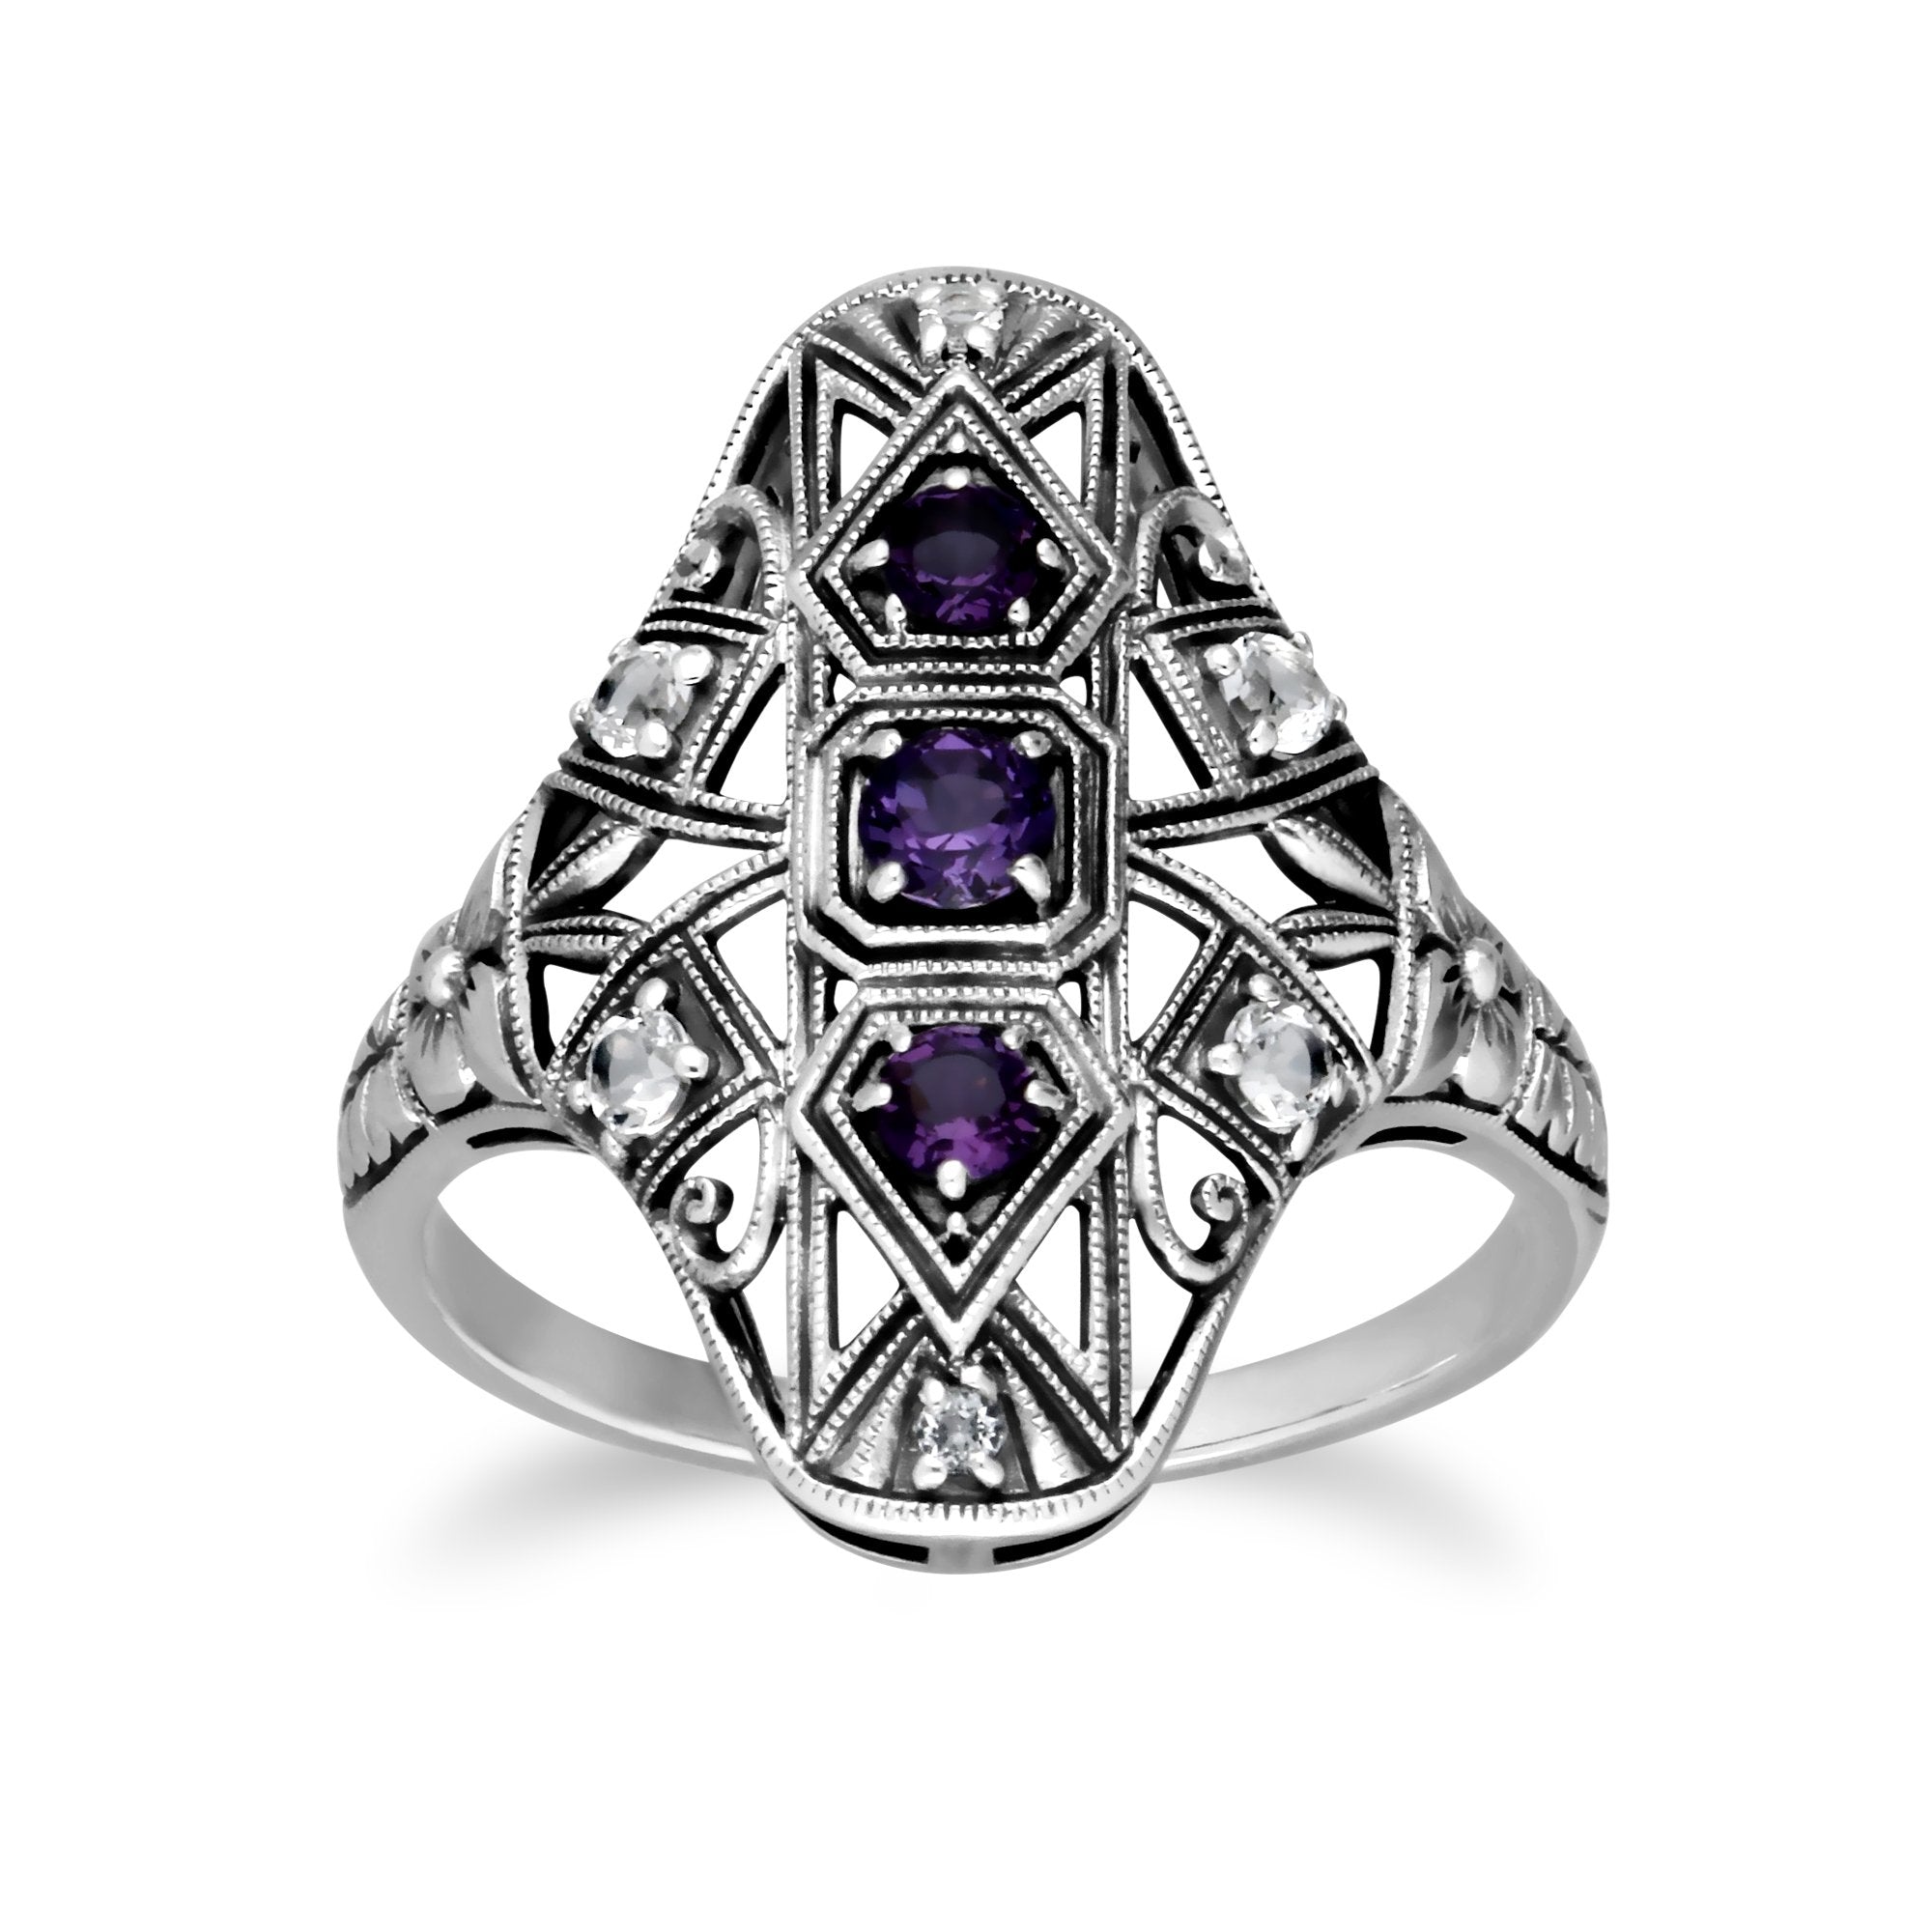 Art Nouveau Style Round Amethyst & White Topaz Statement Ring in 925 Sterling Silver